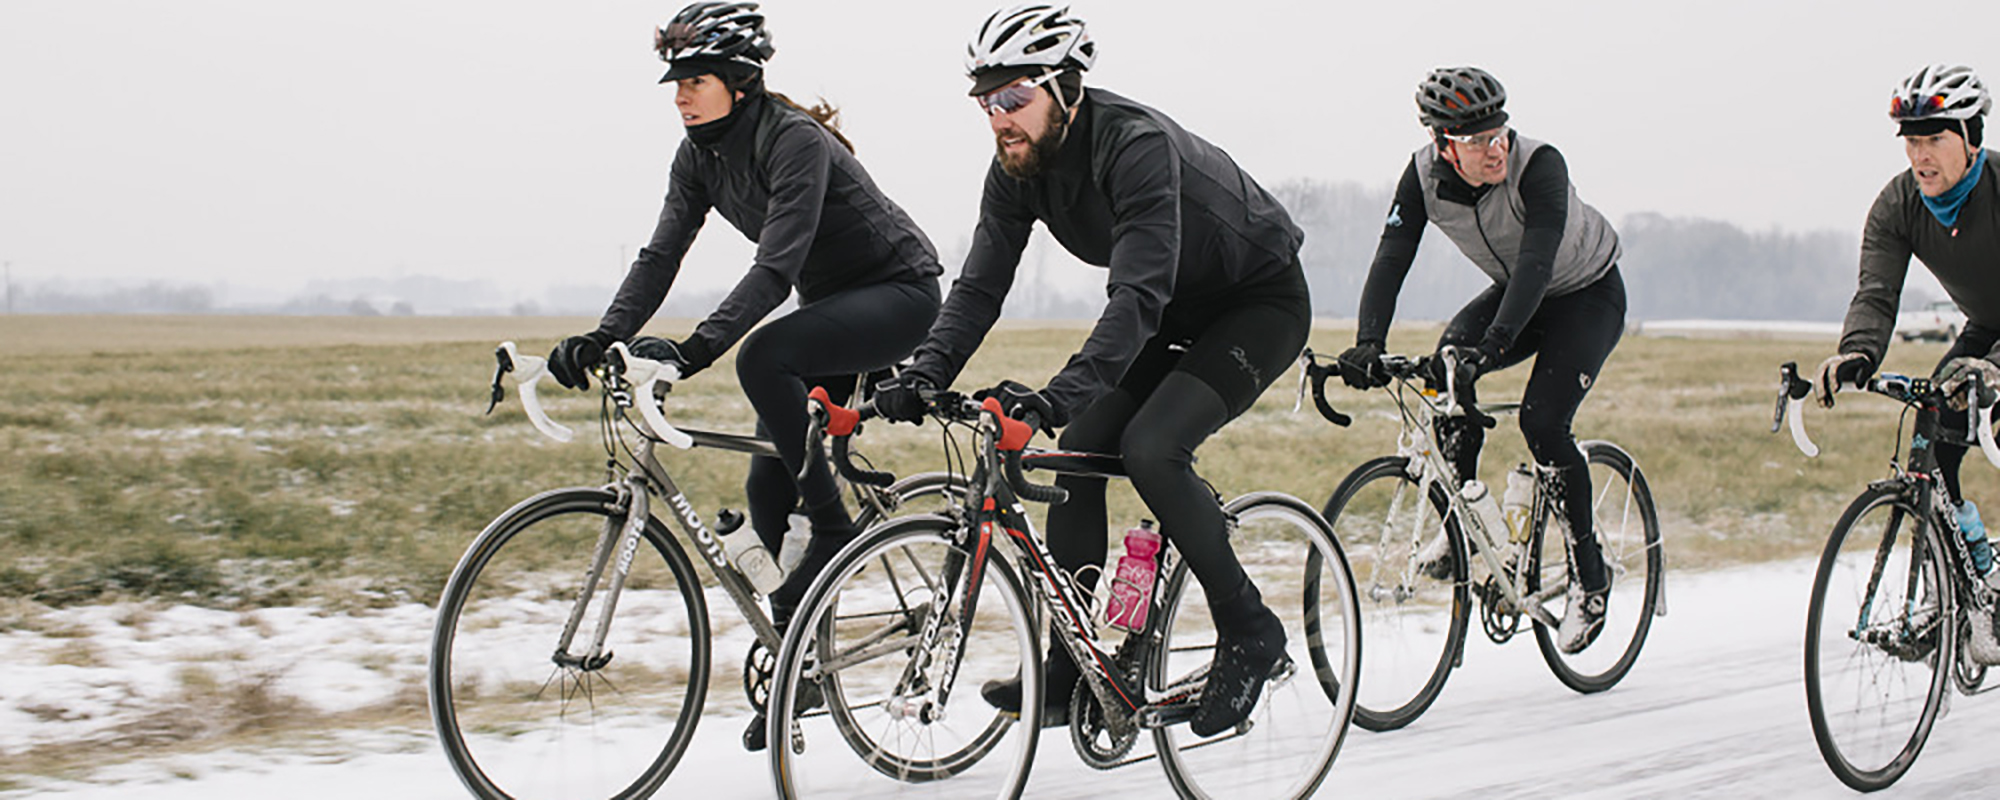 Stay warm on the road with our winter cycling kit